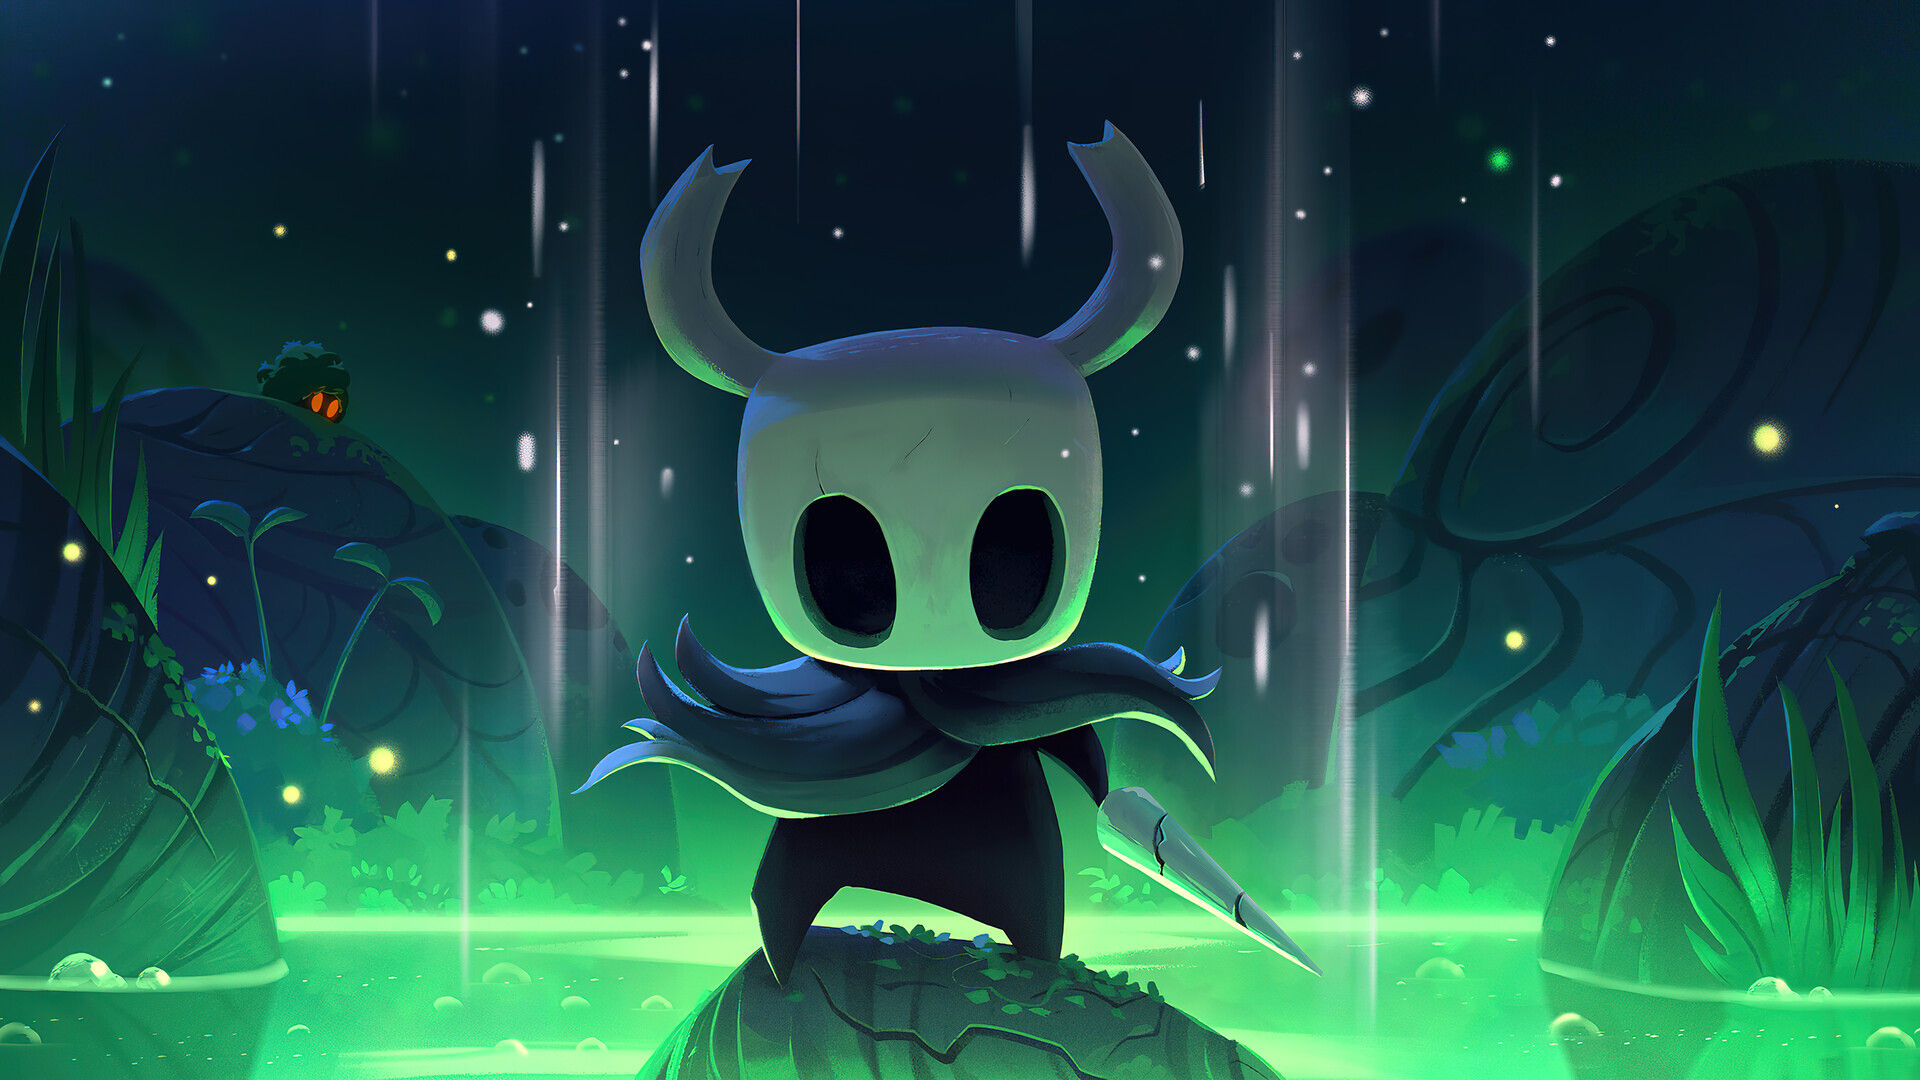 Hollow knight] one of the best indie games of all time, highly